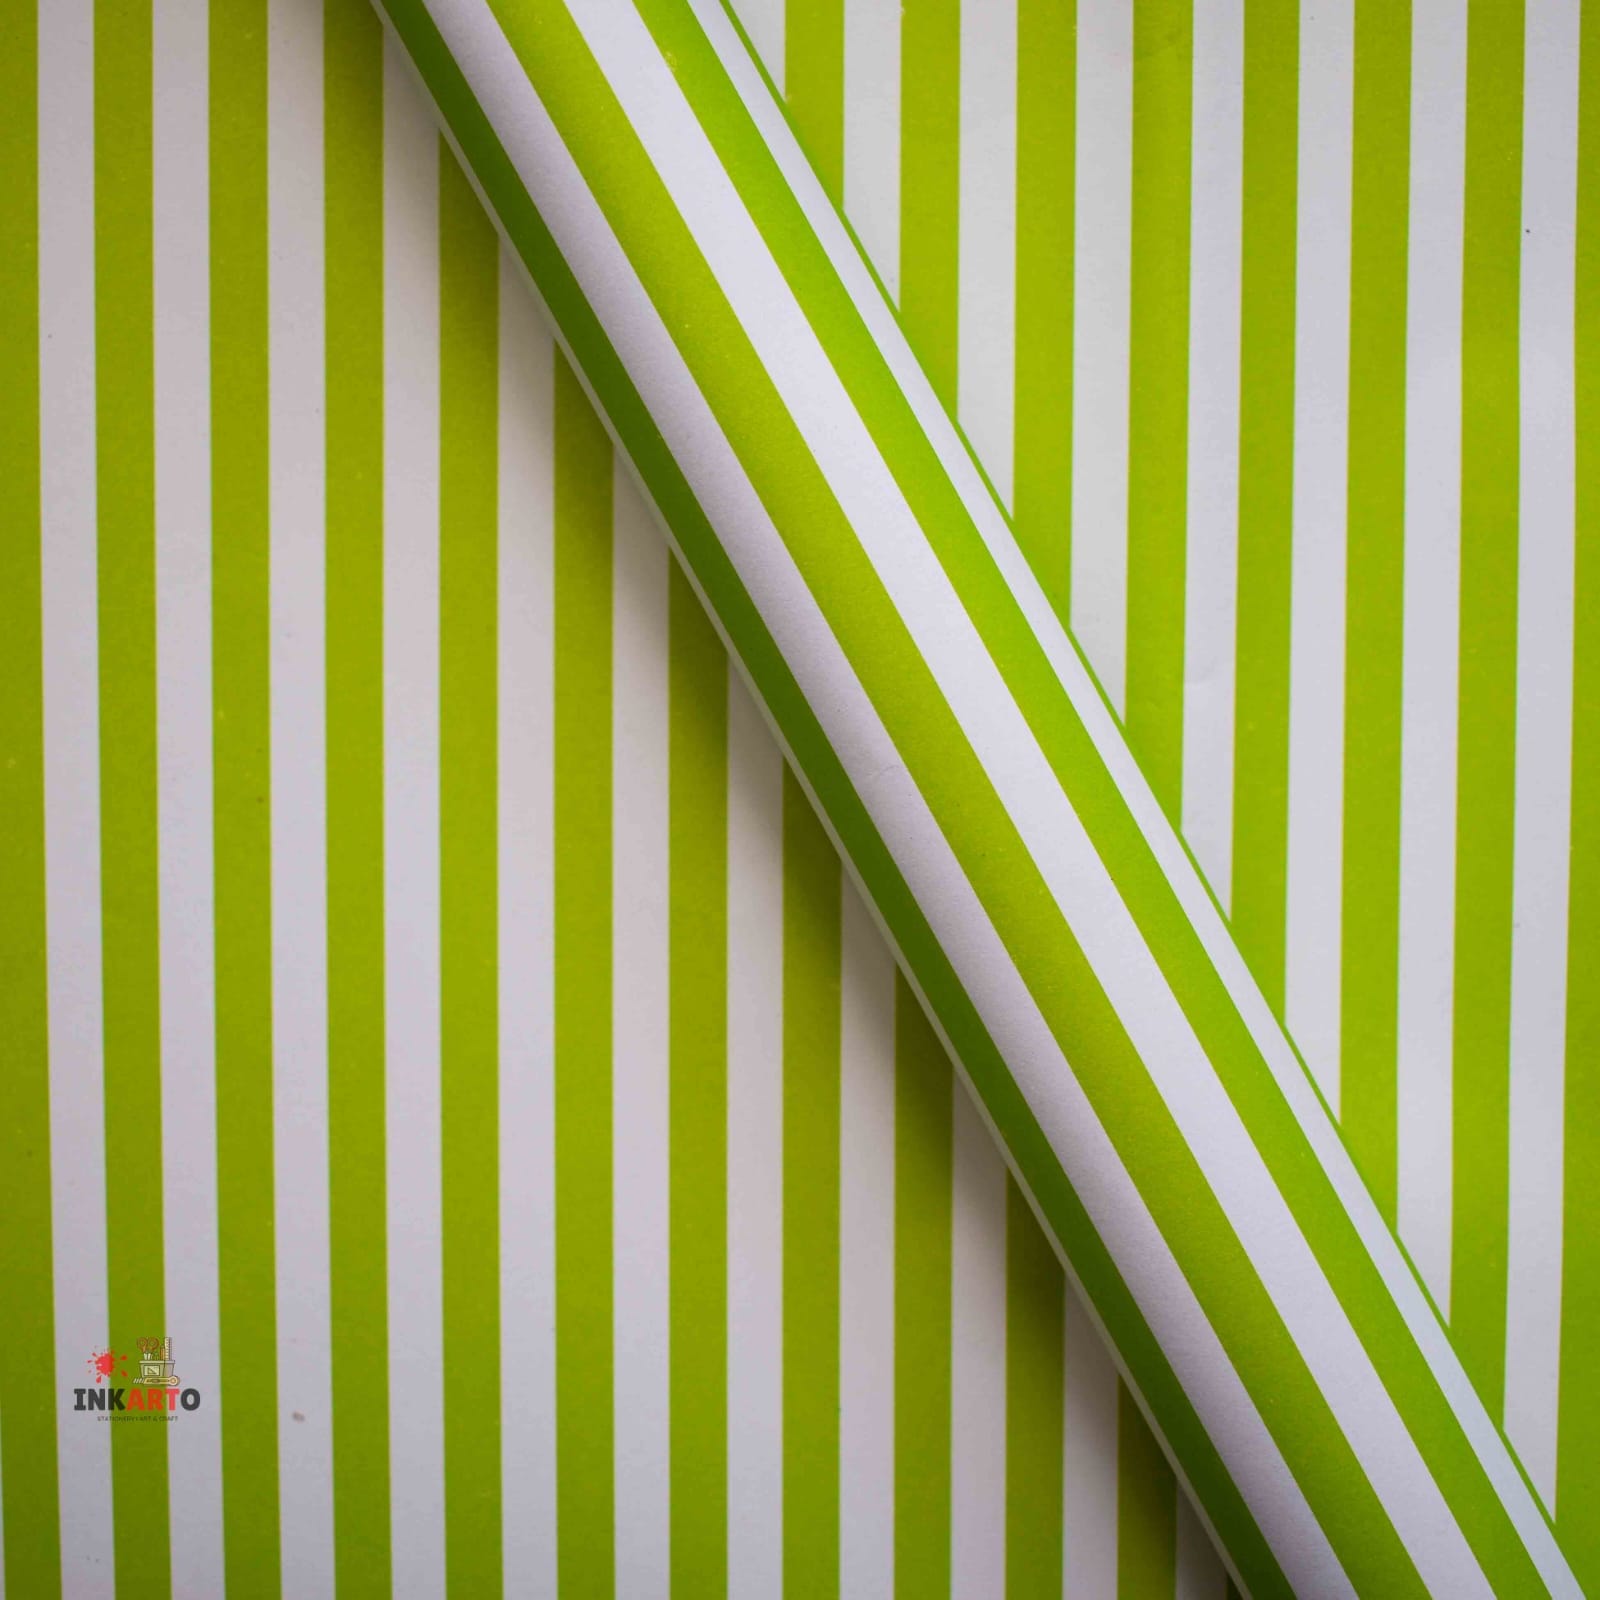 Ravrai Craft Wrapping Paper Vertical lining White and Green large Size Gift Wrapping Paper-pack of 1 sheet